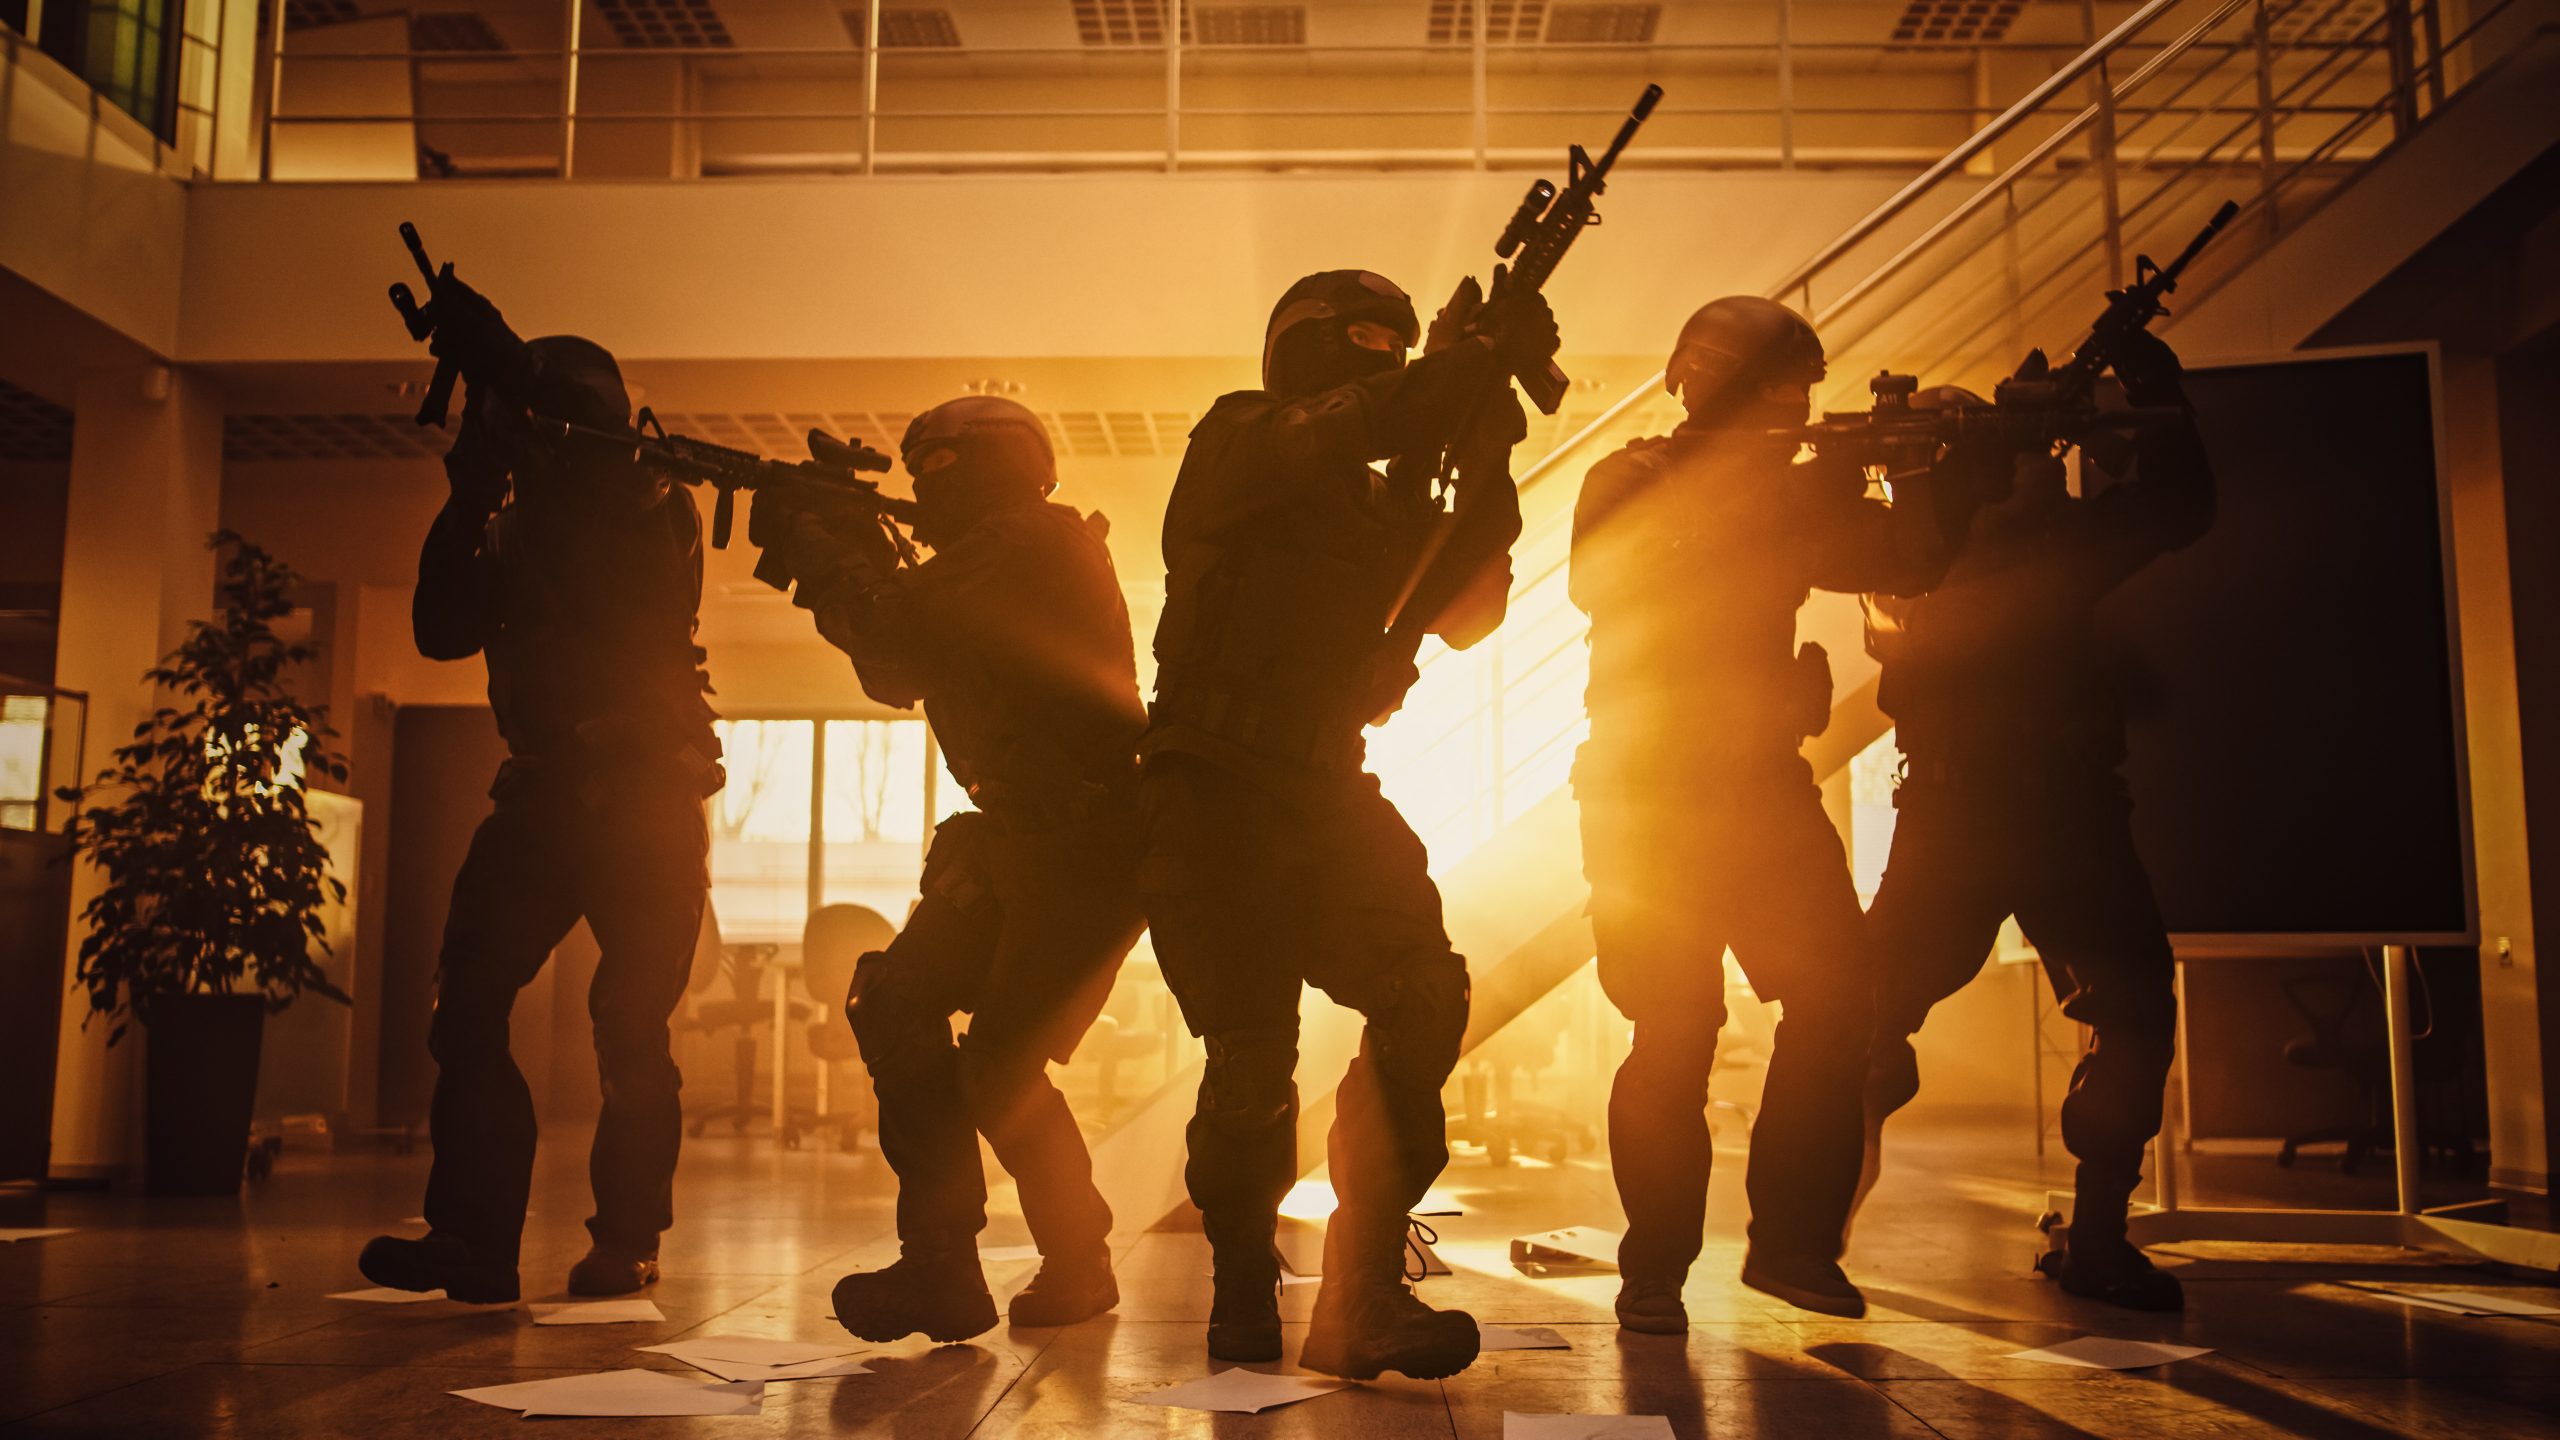 Masked Fireteam of Armed SWAT Police Officers Storm a Sunny Seized Office Building with Desks and Computers. Soldiers with Rifles Move Forwards and Cover Surroundings. Shot with Yellow Warm Filter.